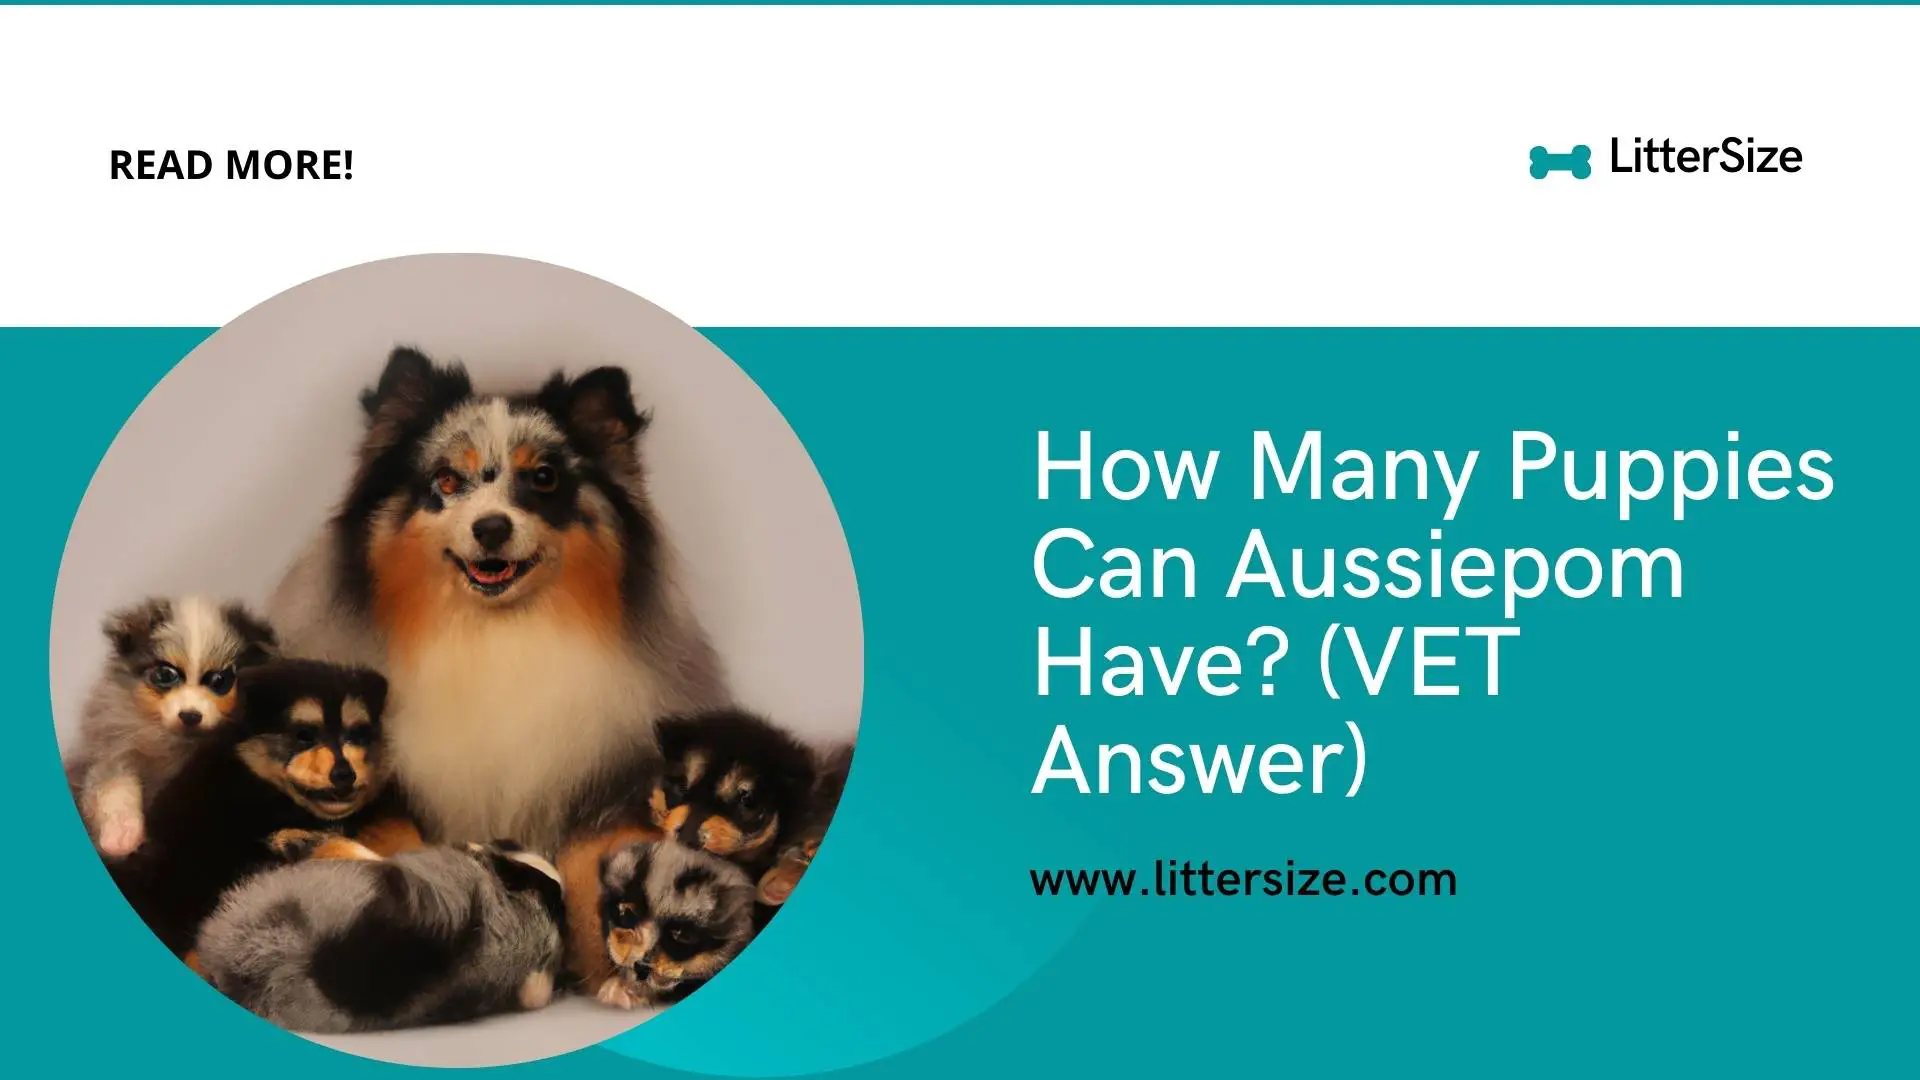 How Many Puppies Can Aussiepom Have? (VET Answer)